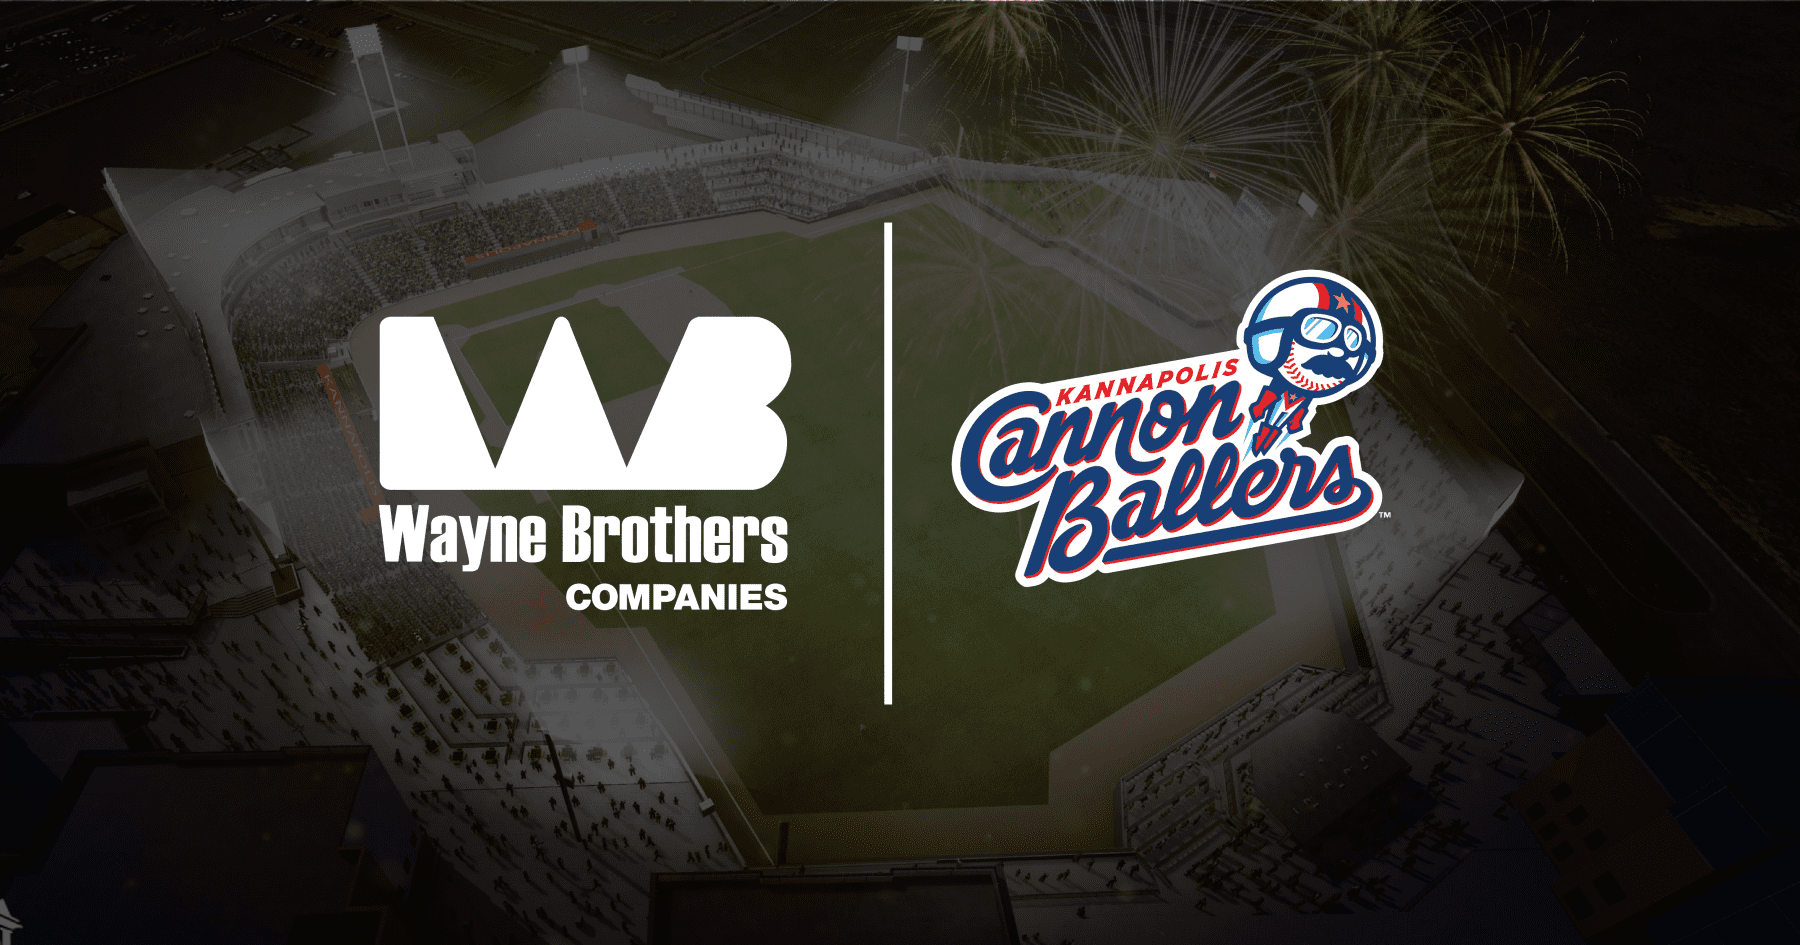 Wayne Brothers Partners with Kannapolis Cannon Ballers